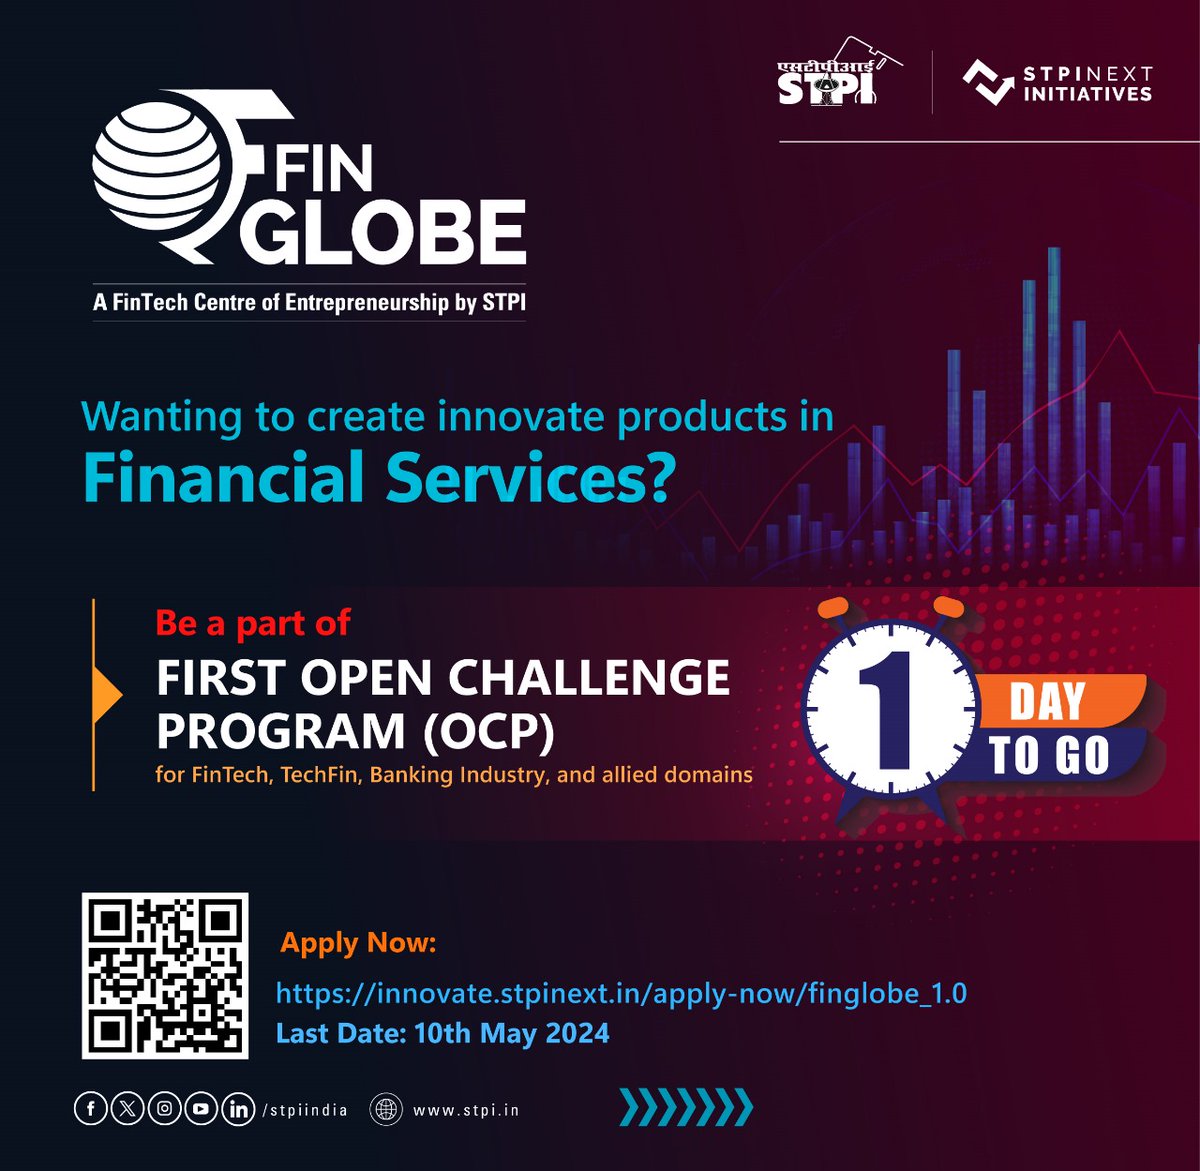 Attention #Fintech Startups!! 🔴 Just 1 day left!⏳ Be a part of STPI FinGlobe CoE's OCP & turn your dream into reality of becoming a successful entrepreneur using latest technology trends in financial services sector. Apply Now: innovate.stpinext.in/apply-now/fing… Deadline: 10.05.2024